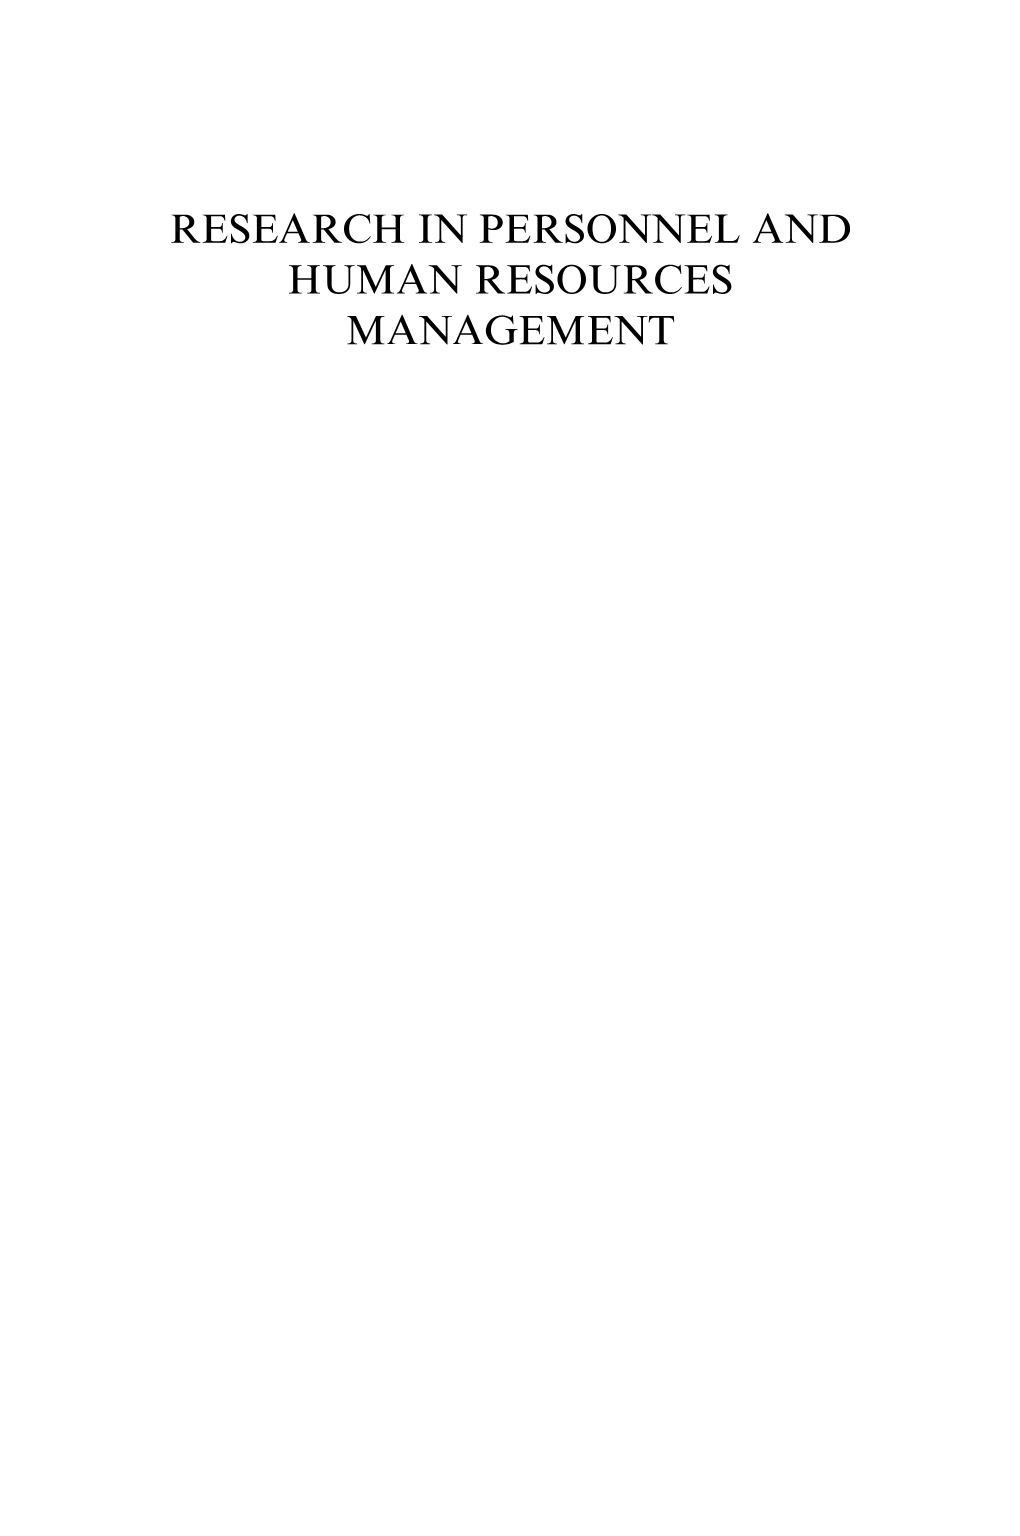 RESEARCH in PERSONNEL and HUMAN RESOURCES MANAGEMENT RESEARCH in PERSONNEL and HUMAN RESOURCES MANAGEMENT Series Editors: M